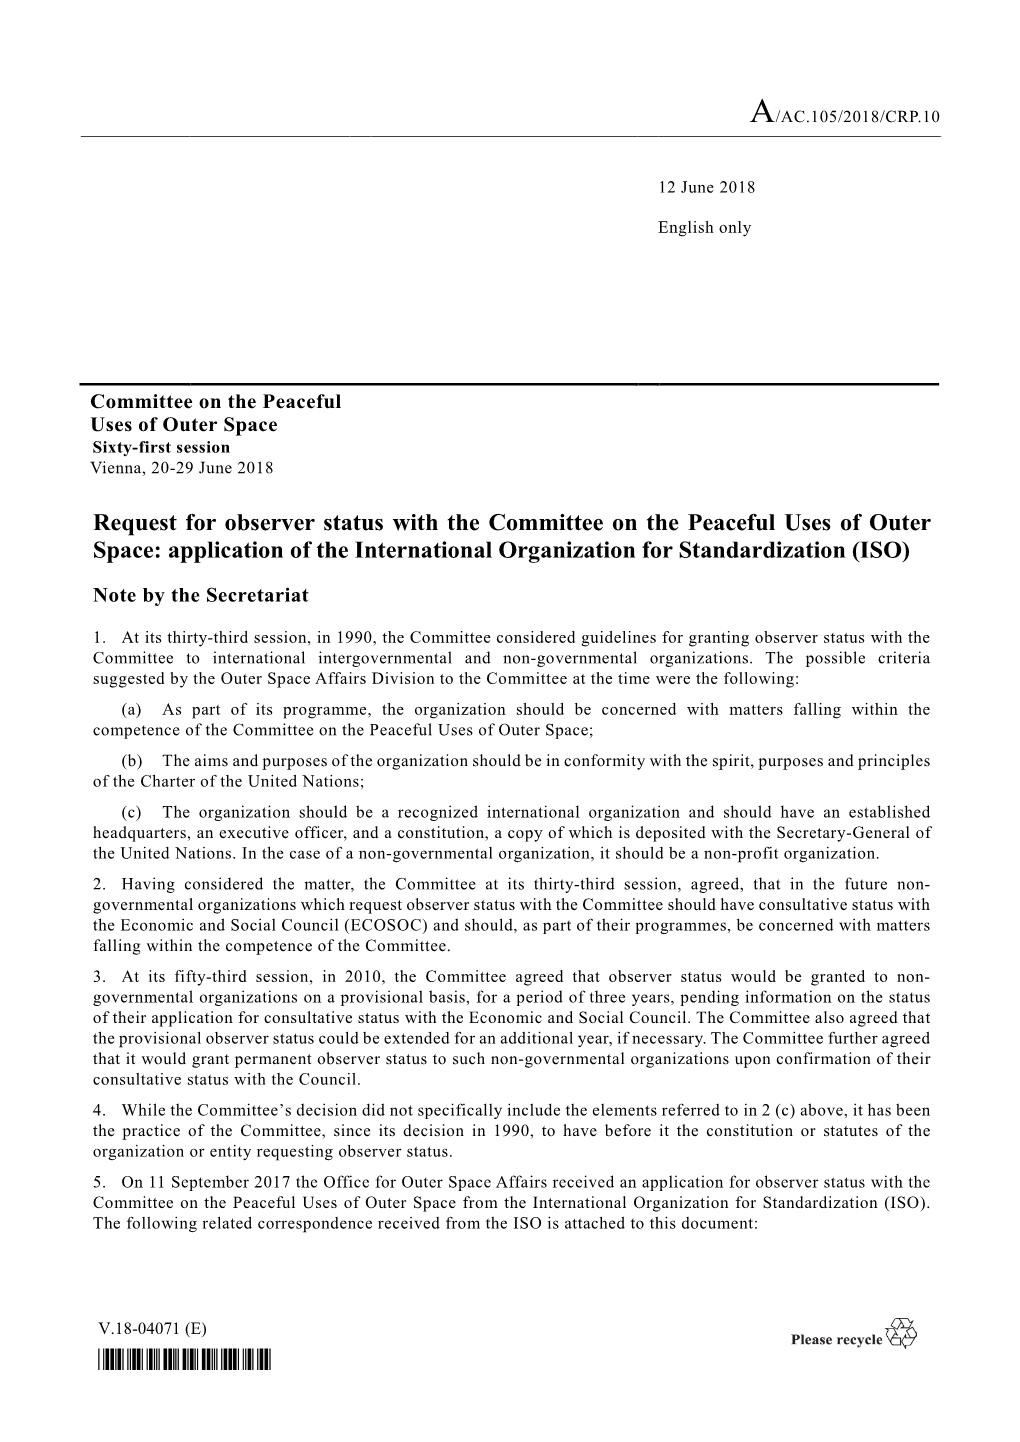 Request for Observer Status with the Committee on the Peaceful Uses of Outer Space: Application of the International Organization for Standardization (ISO)